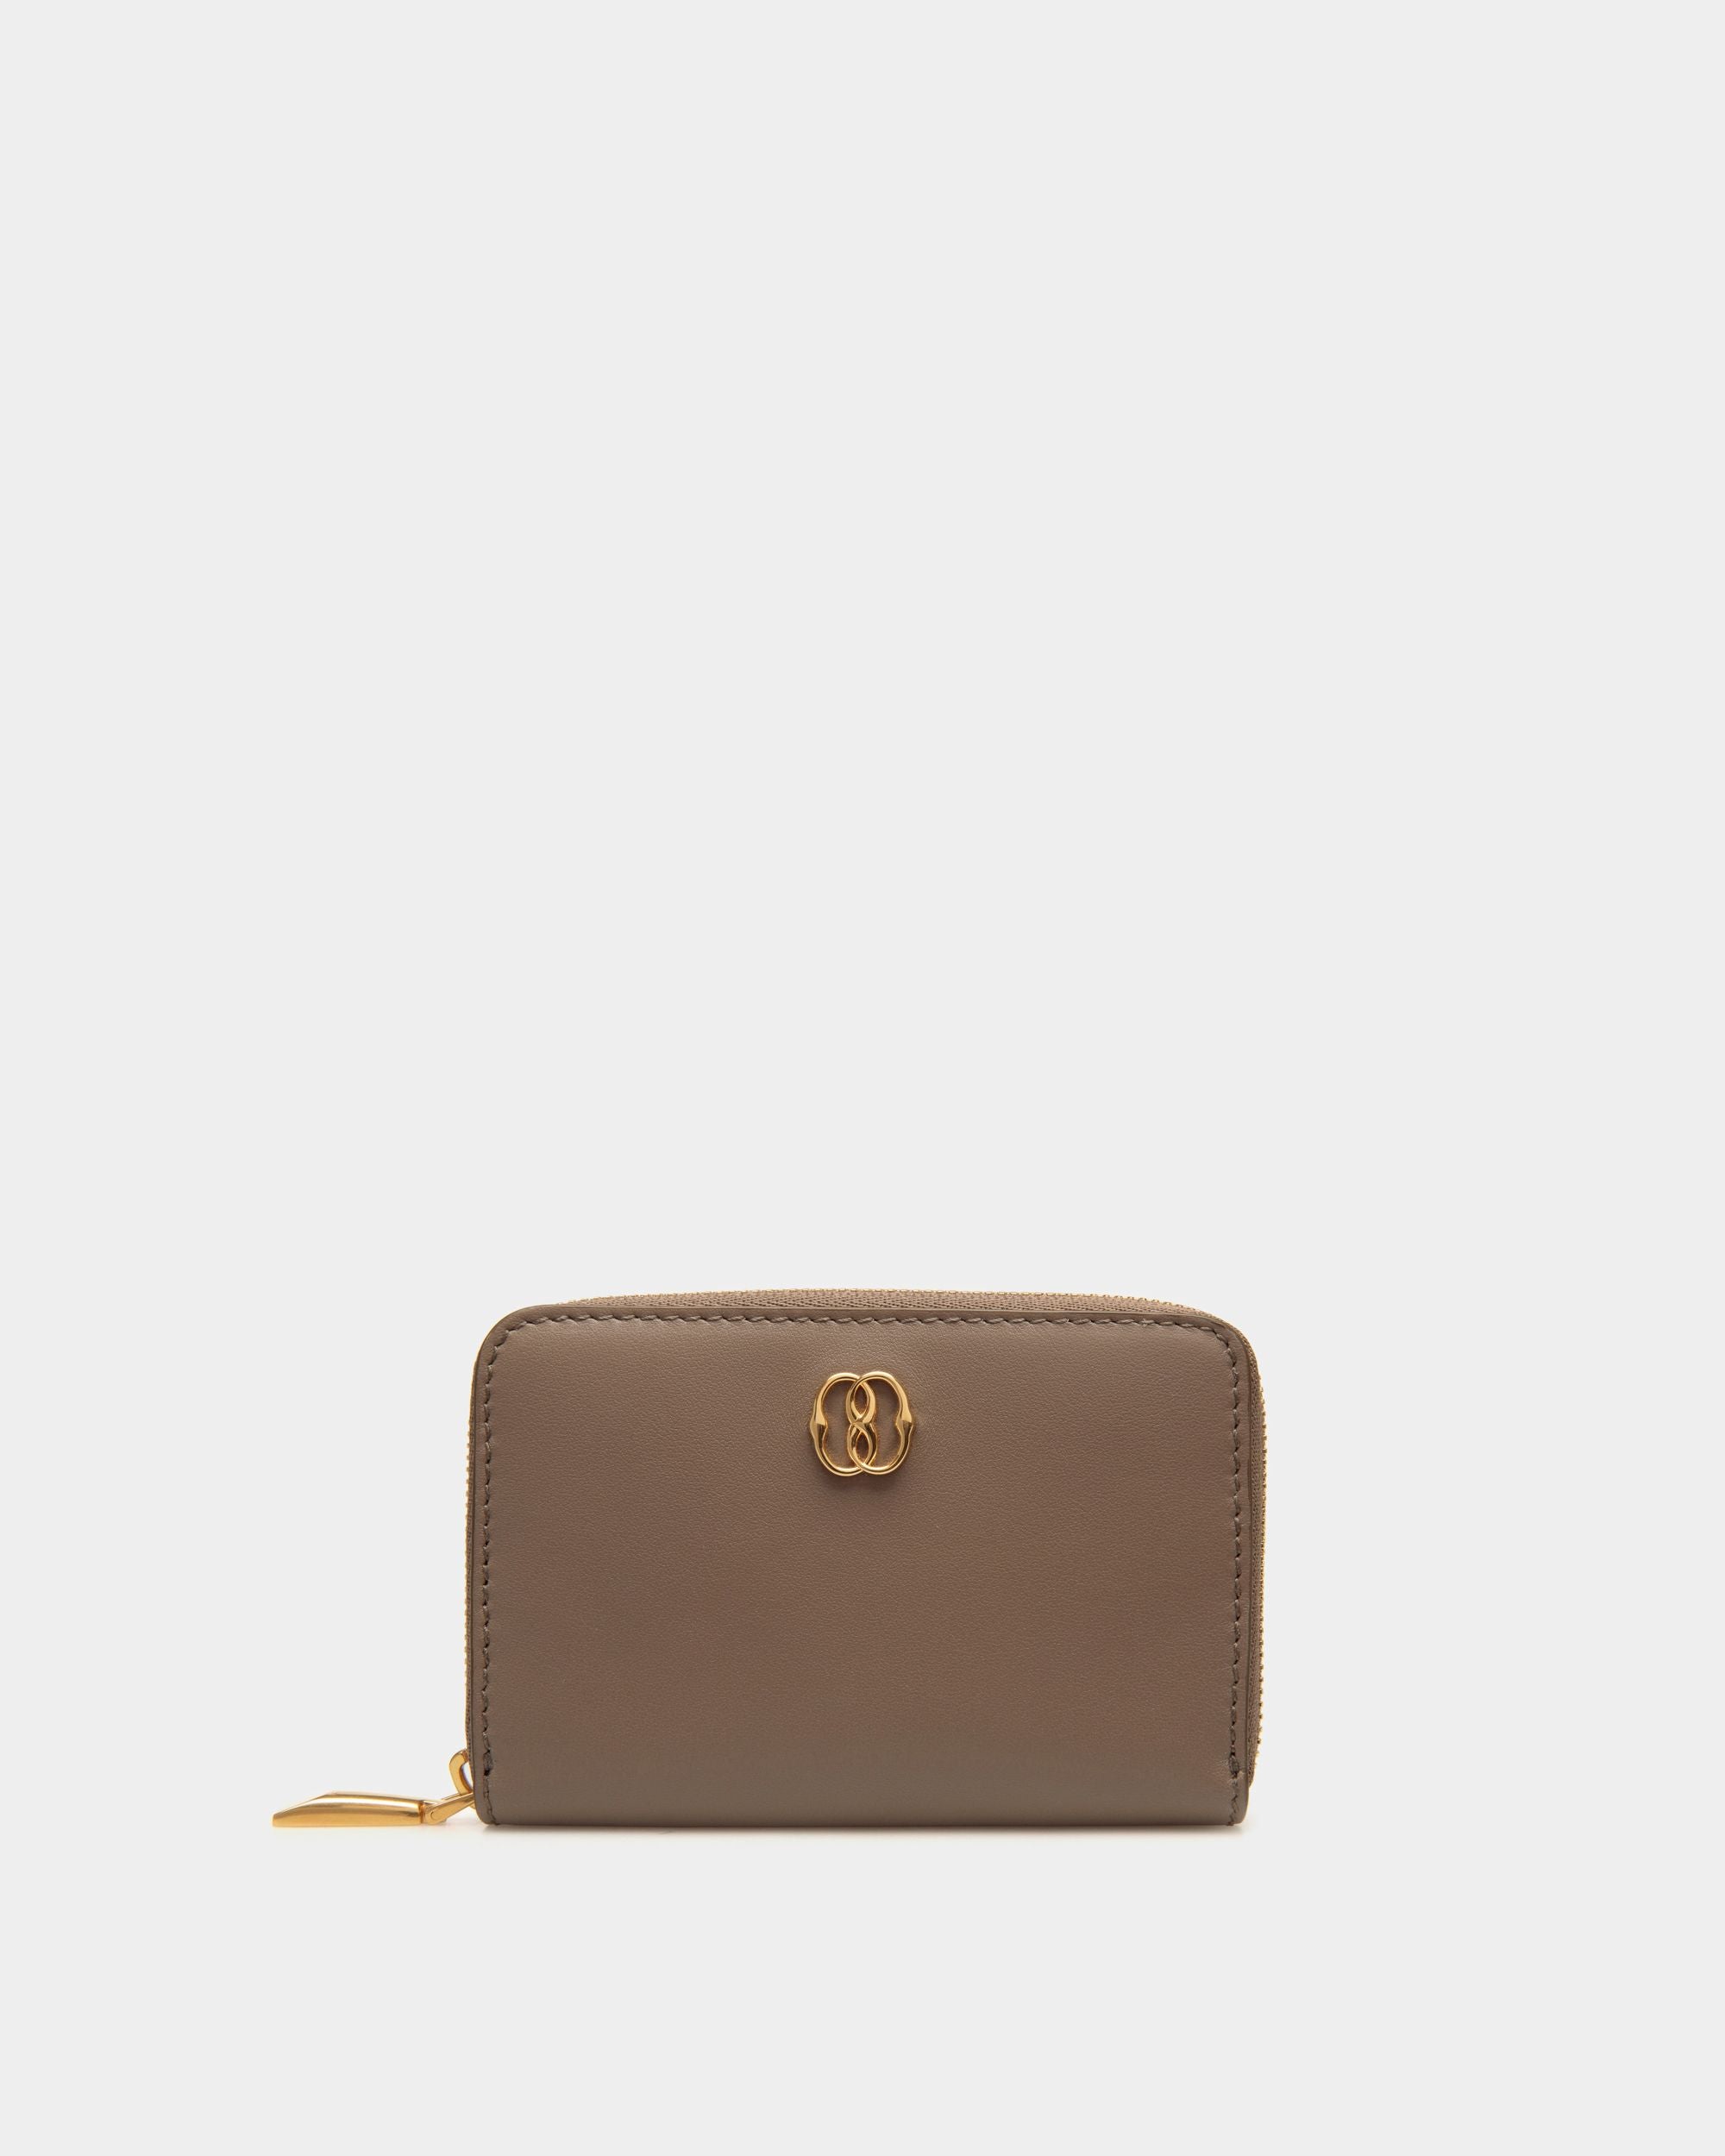 Emblem | Women's Coin and Card Wallet in Beige Leather | Bally | Still Life Front